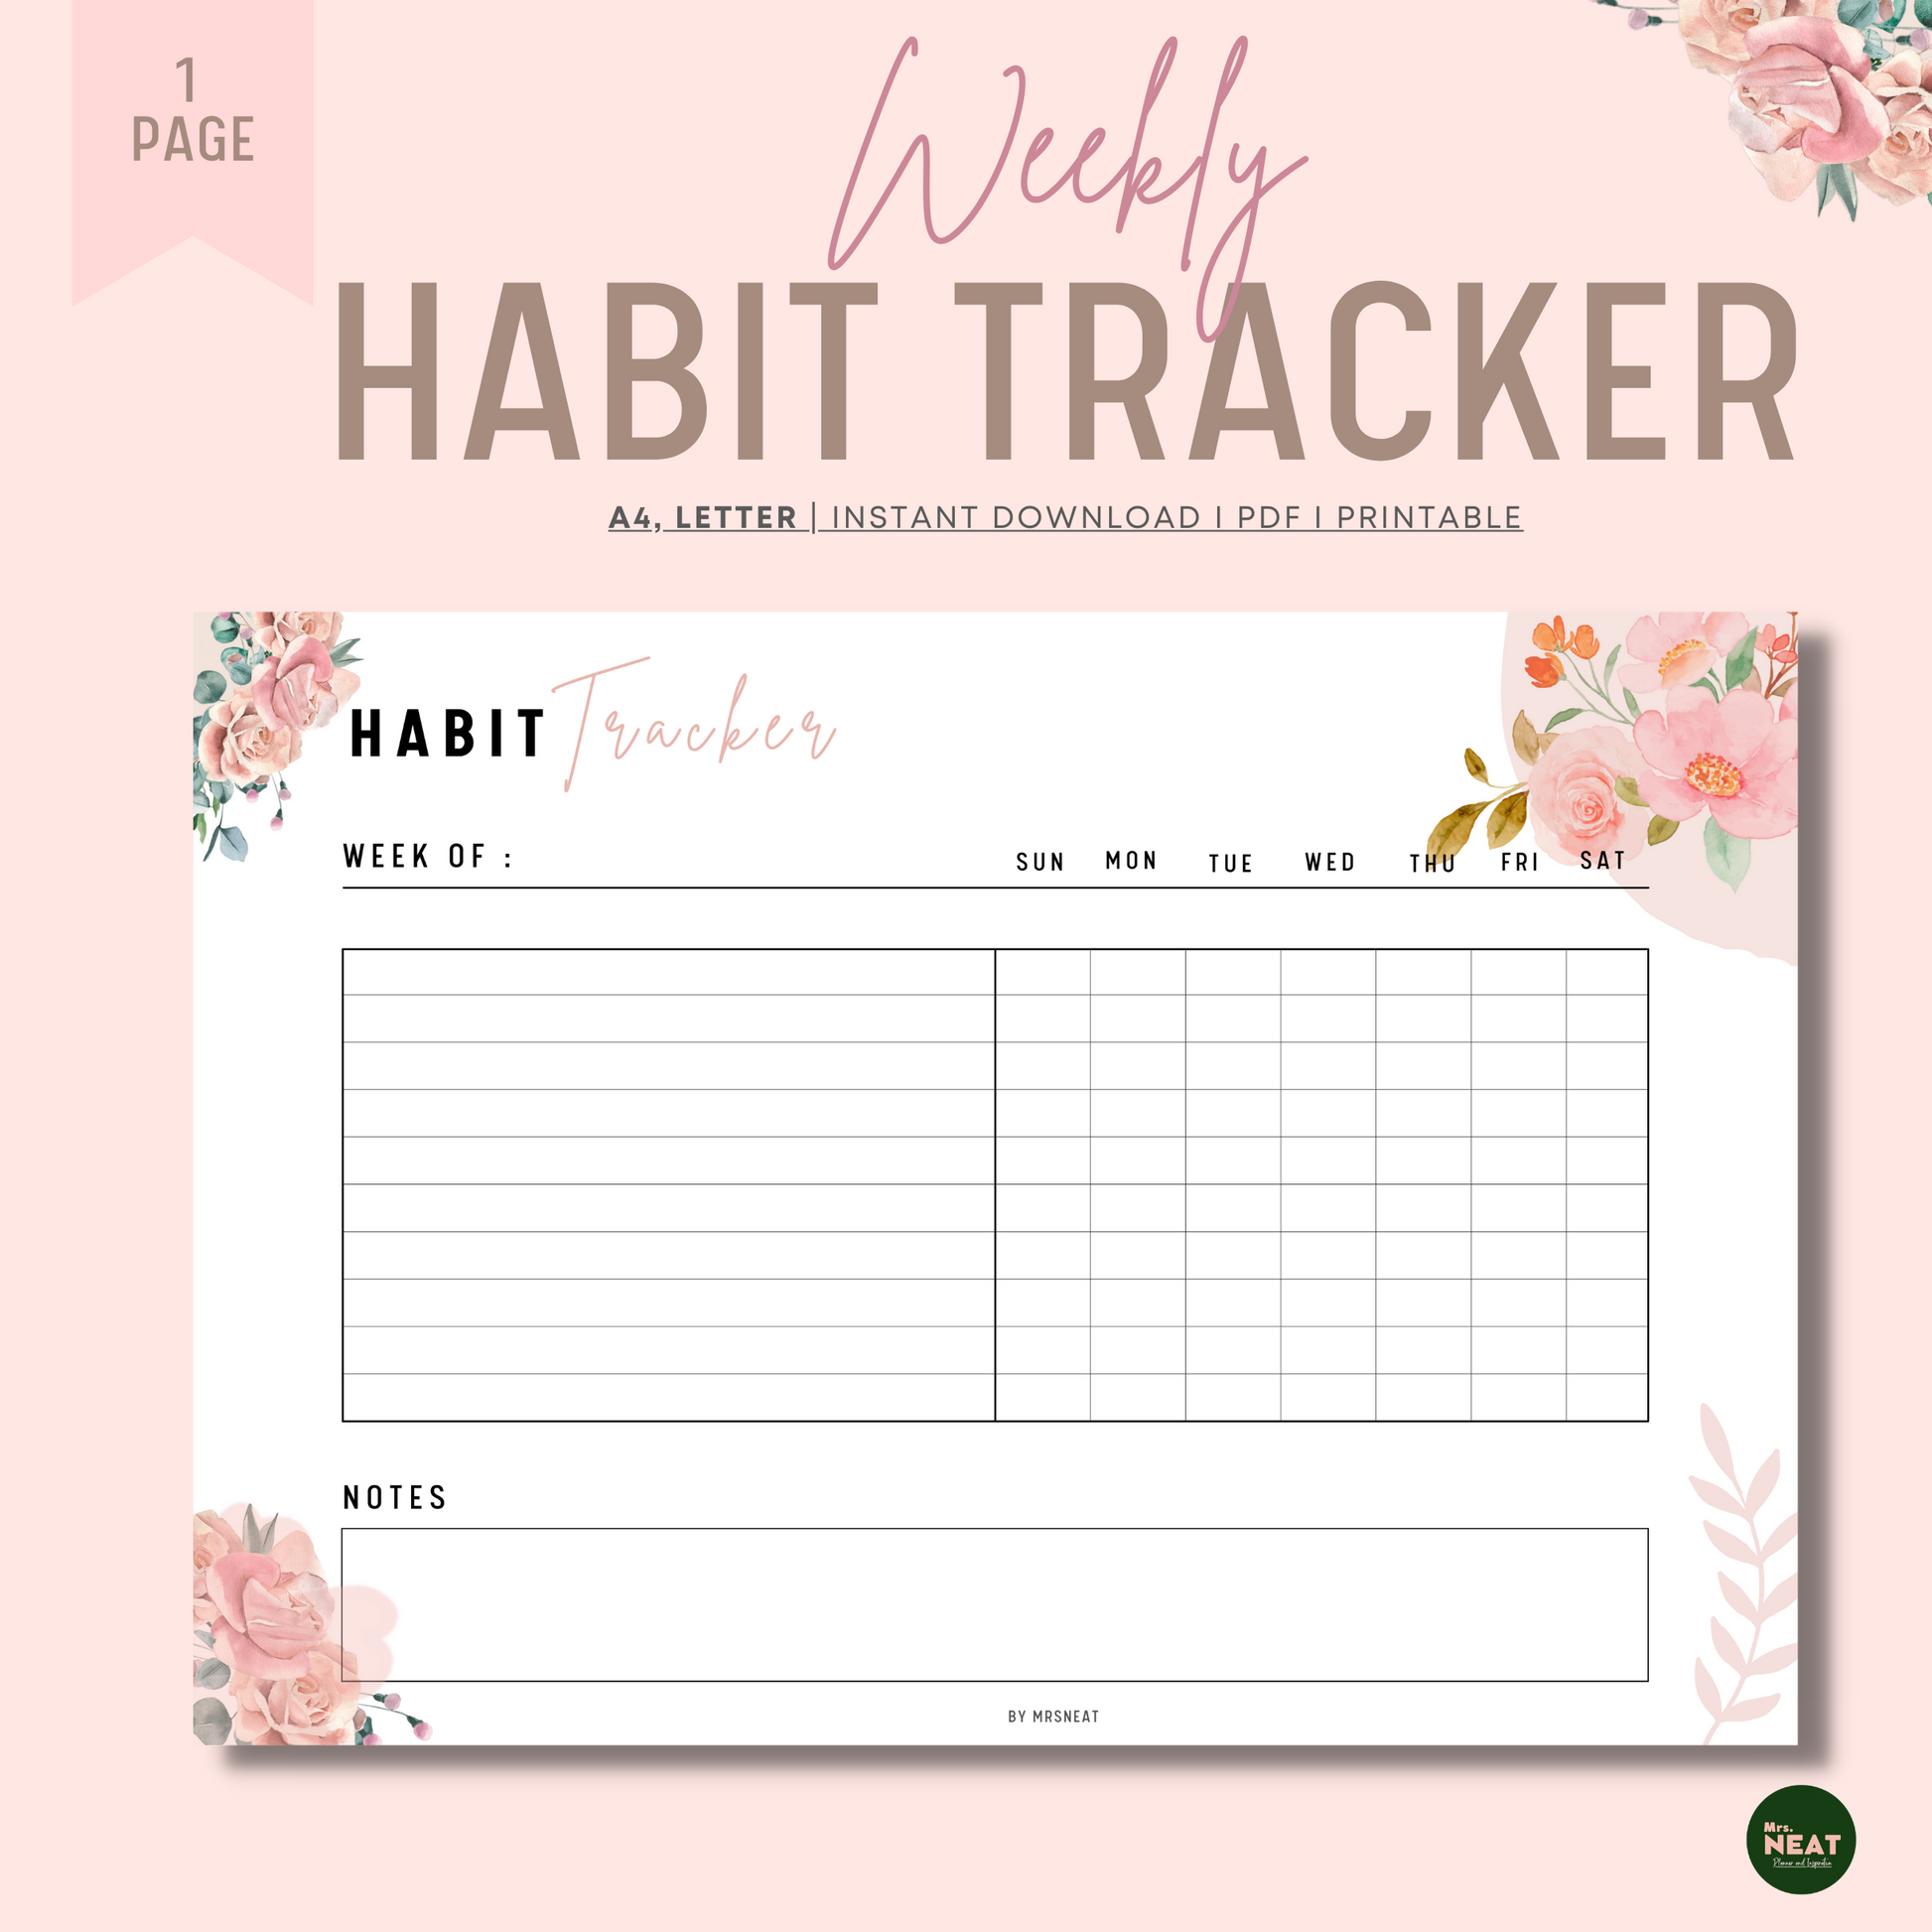 Beautiful Floral Weekly Habit Tracker Planner with undated week, Sunday Start and plenty room for habits and notes